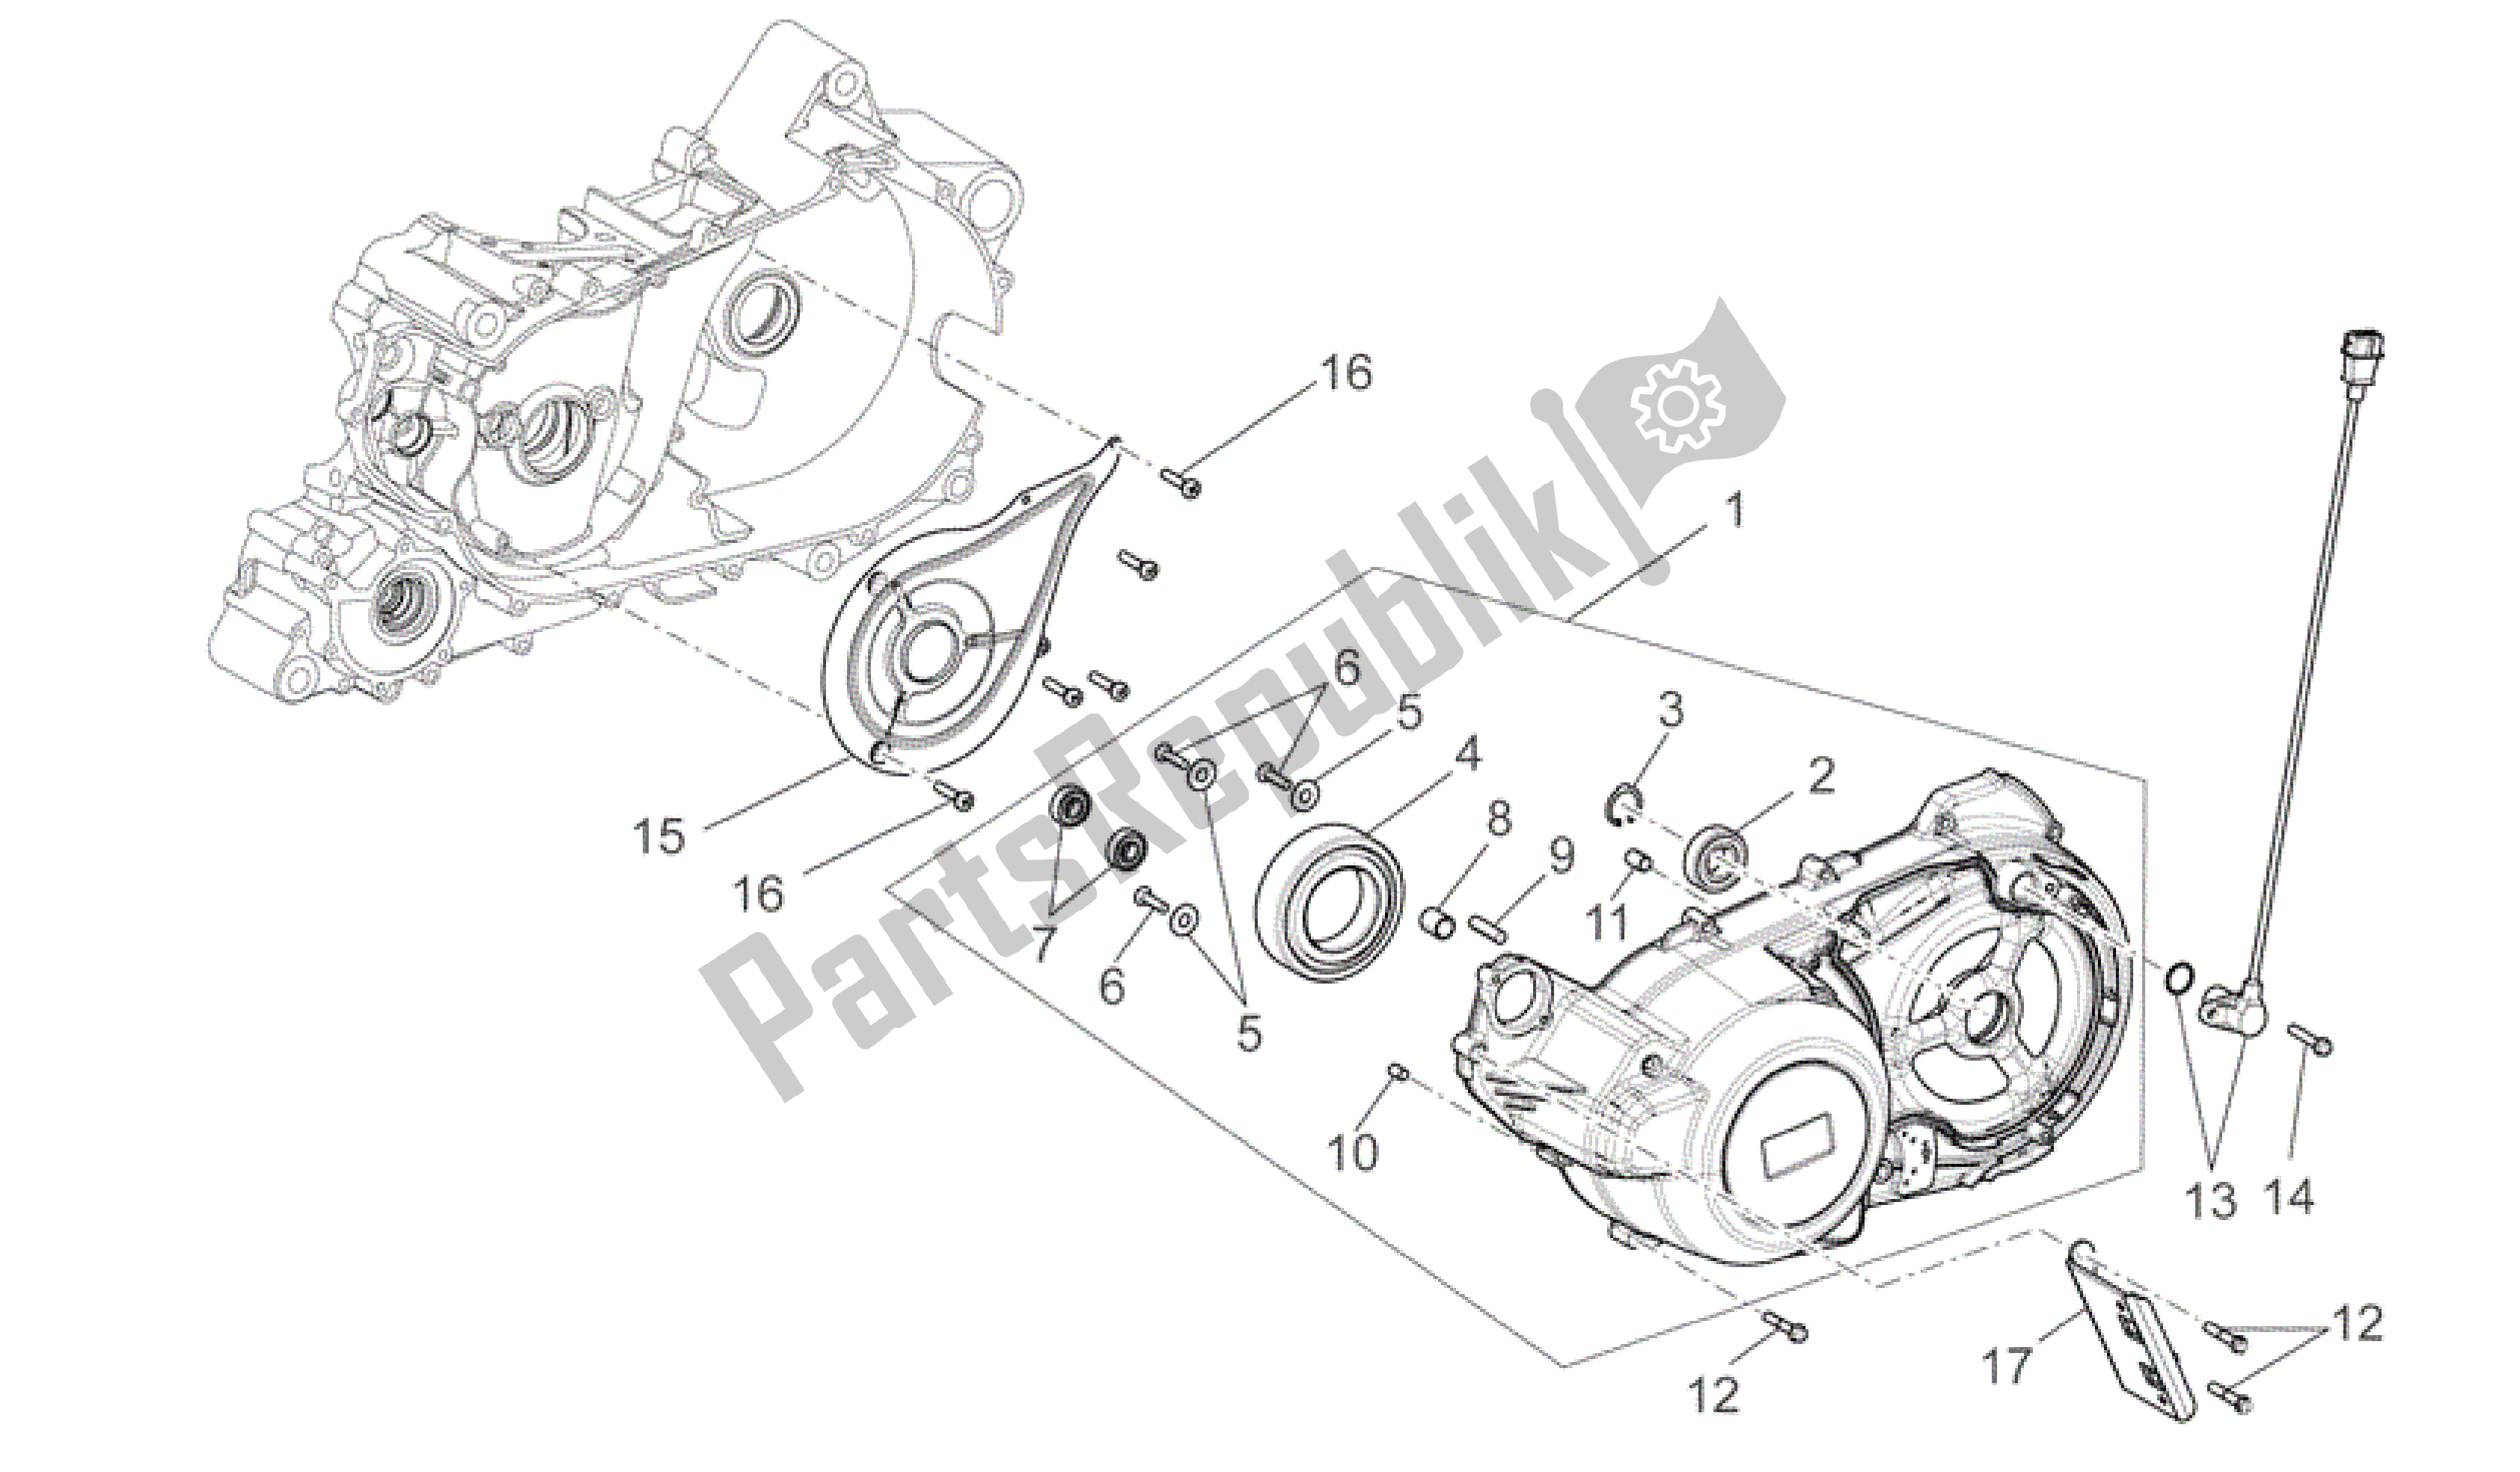 All parts for the Transmission Cover of the Aprilia Mana 850 2007 - 2011